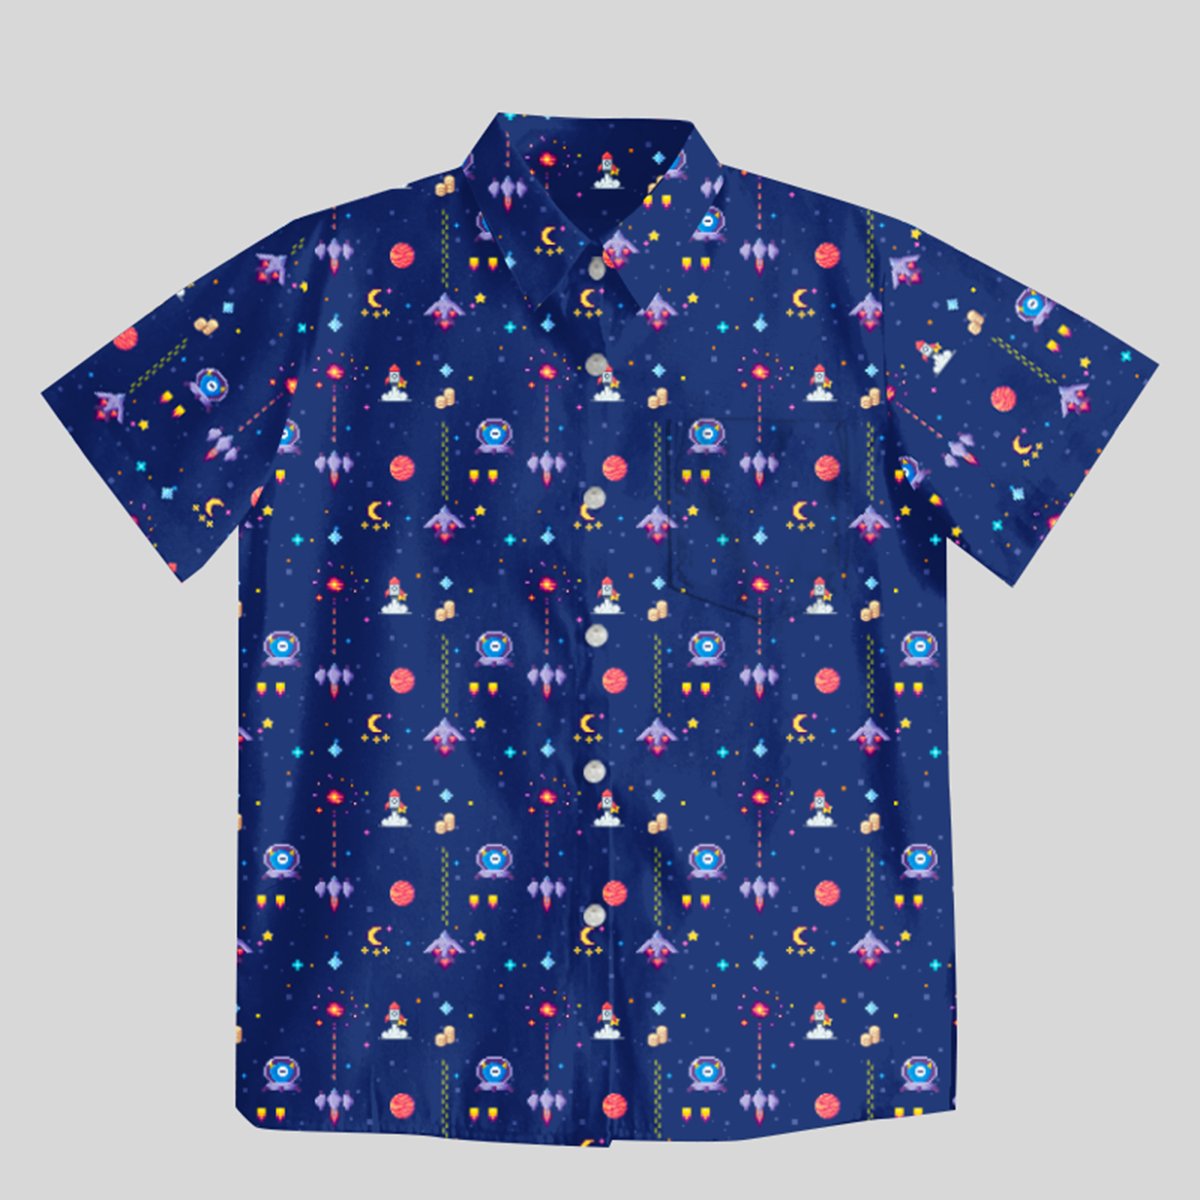 Retro Style Arcade Video Game featuring Space Blue Button Up Pocket Shirt - Geeksoutfit